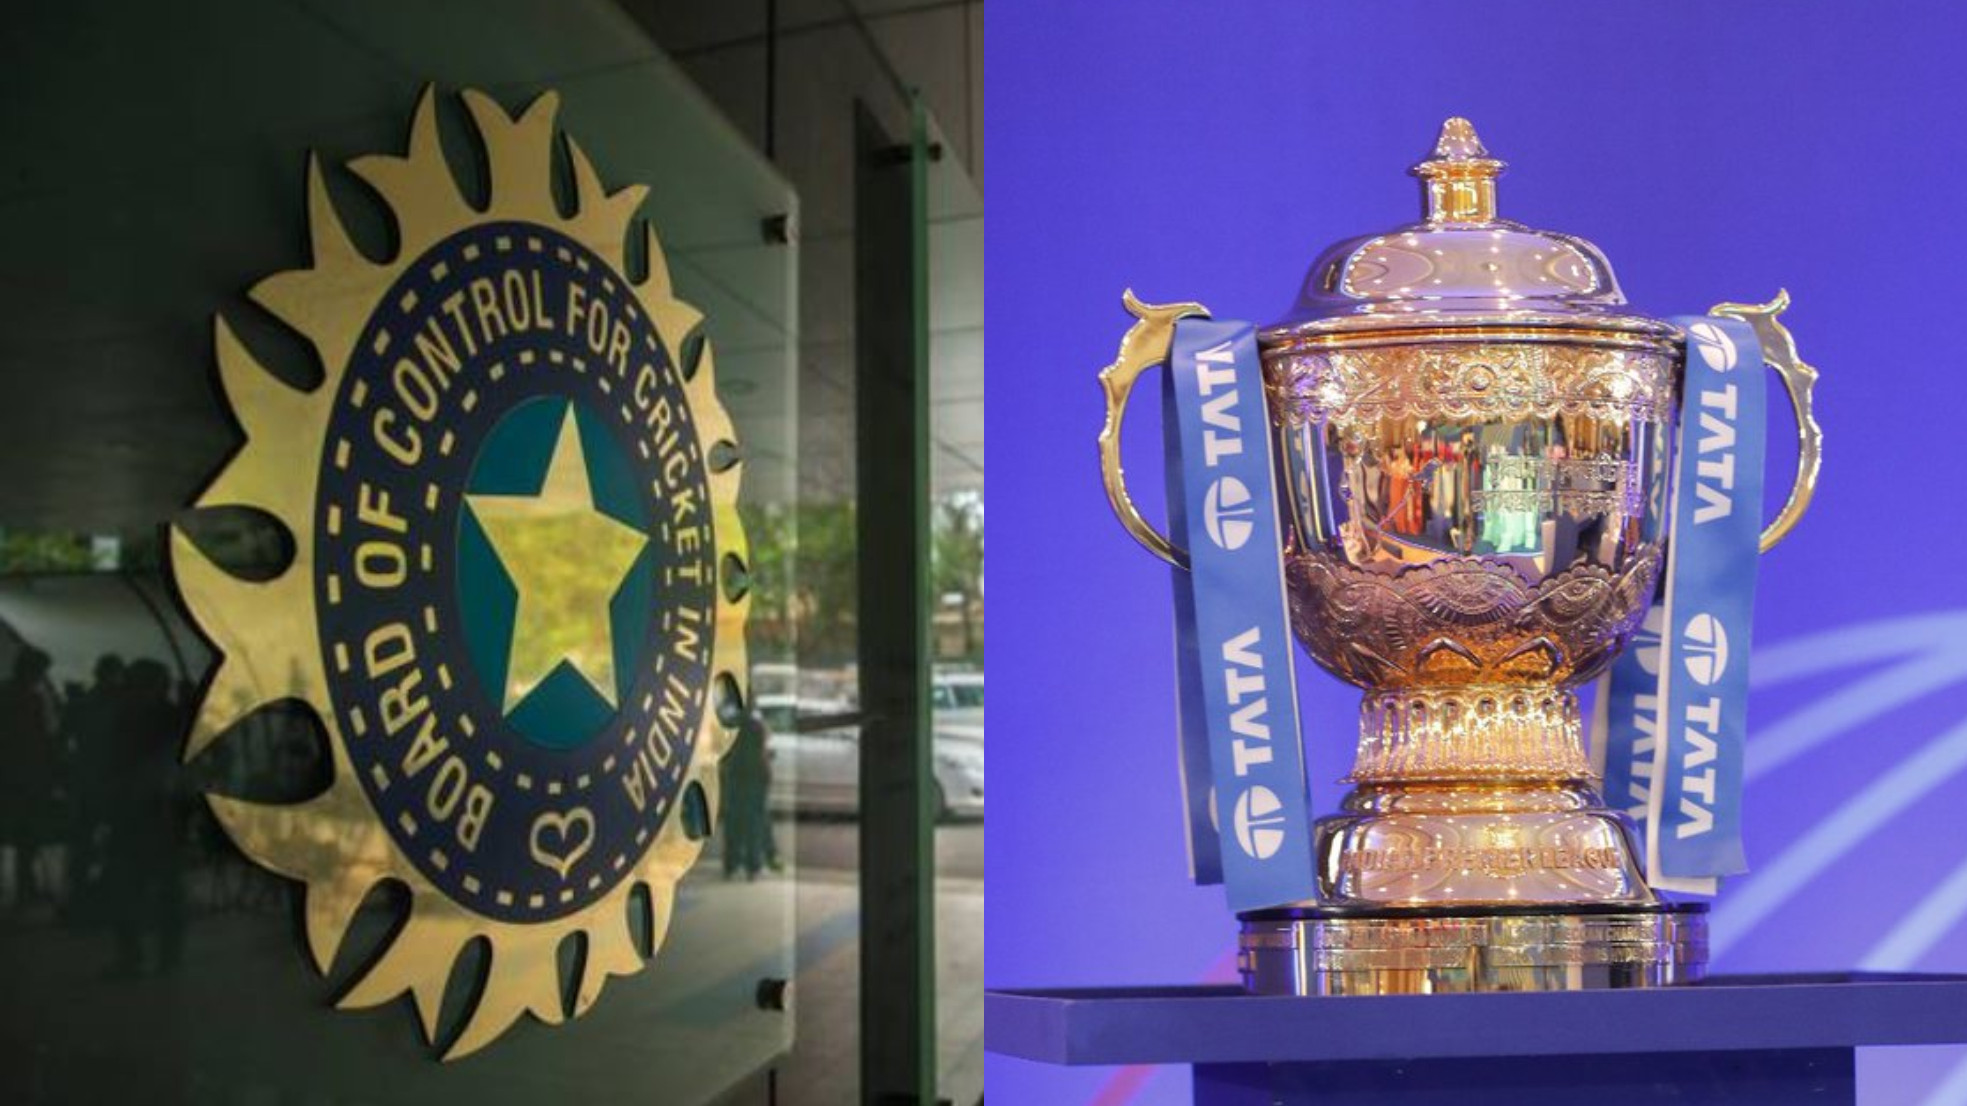 IPL 2022: League stage set to have 55 matches in Mumbai, 15 in Pune- Report